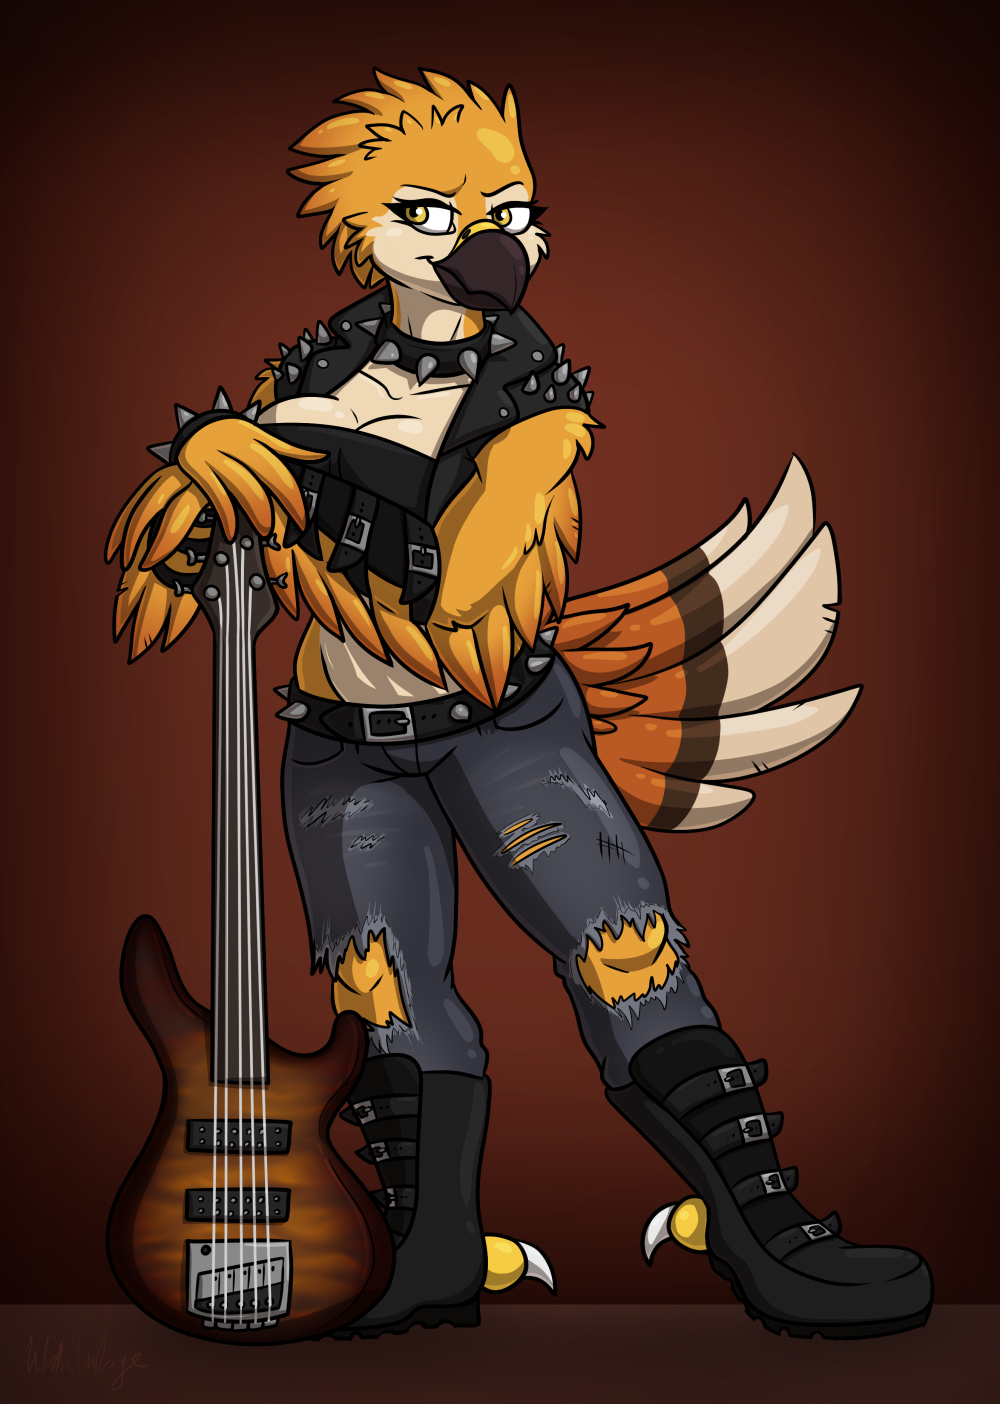 Most recent image: She's Gonna Rock Your Bass Off